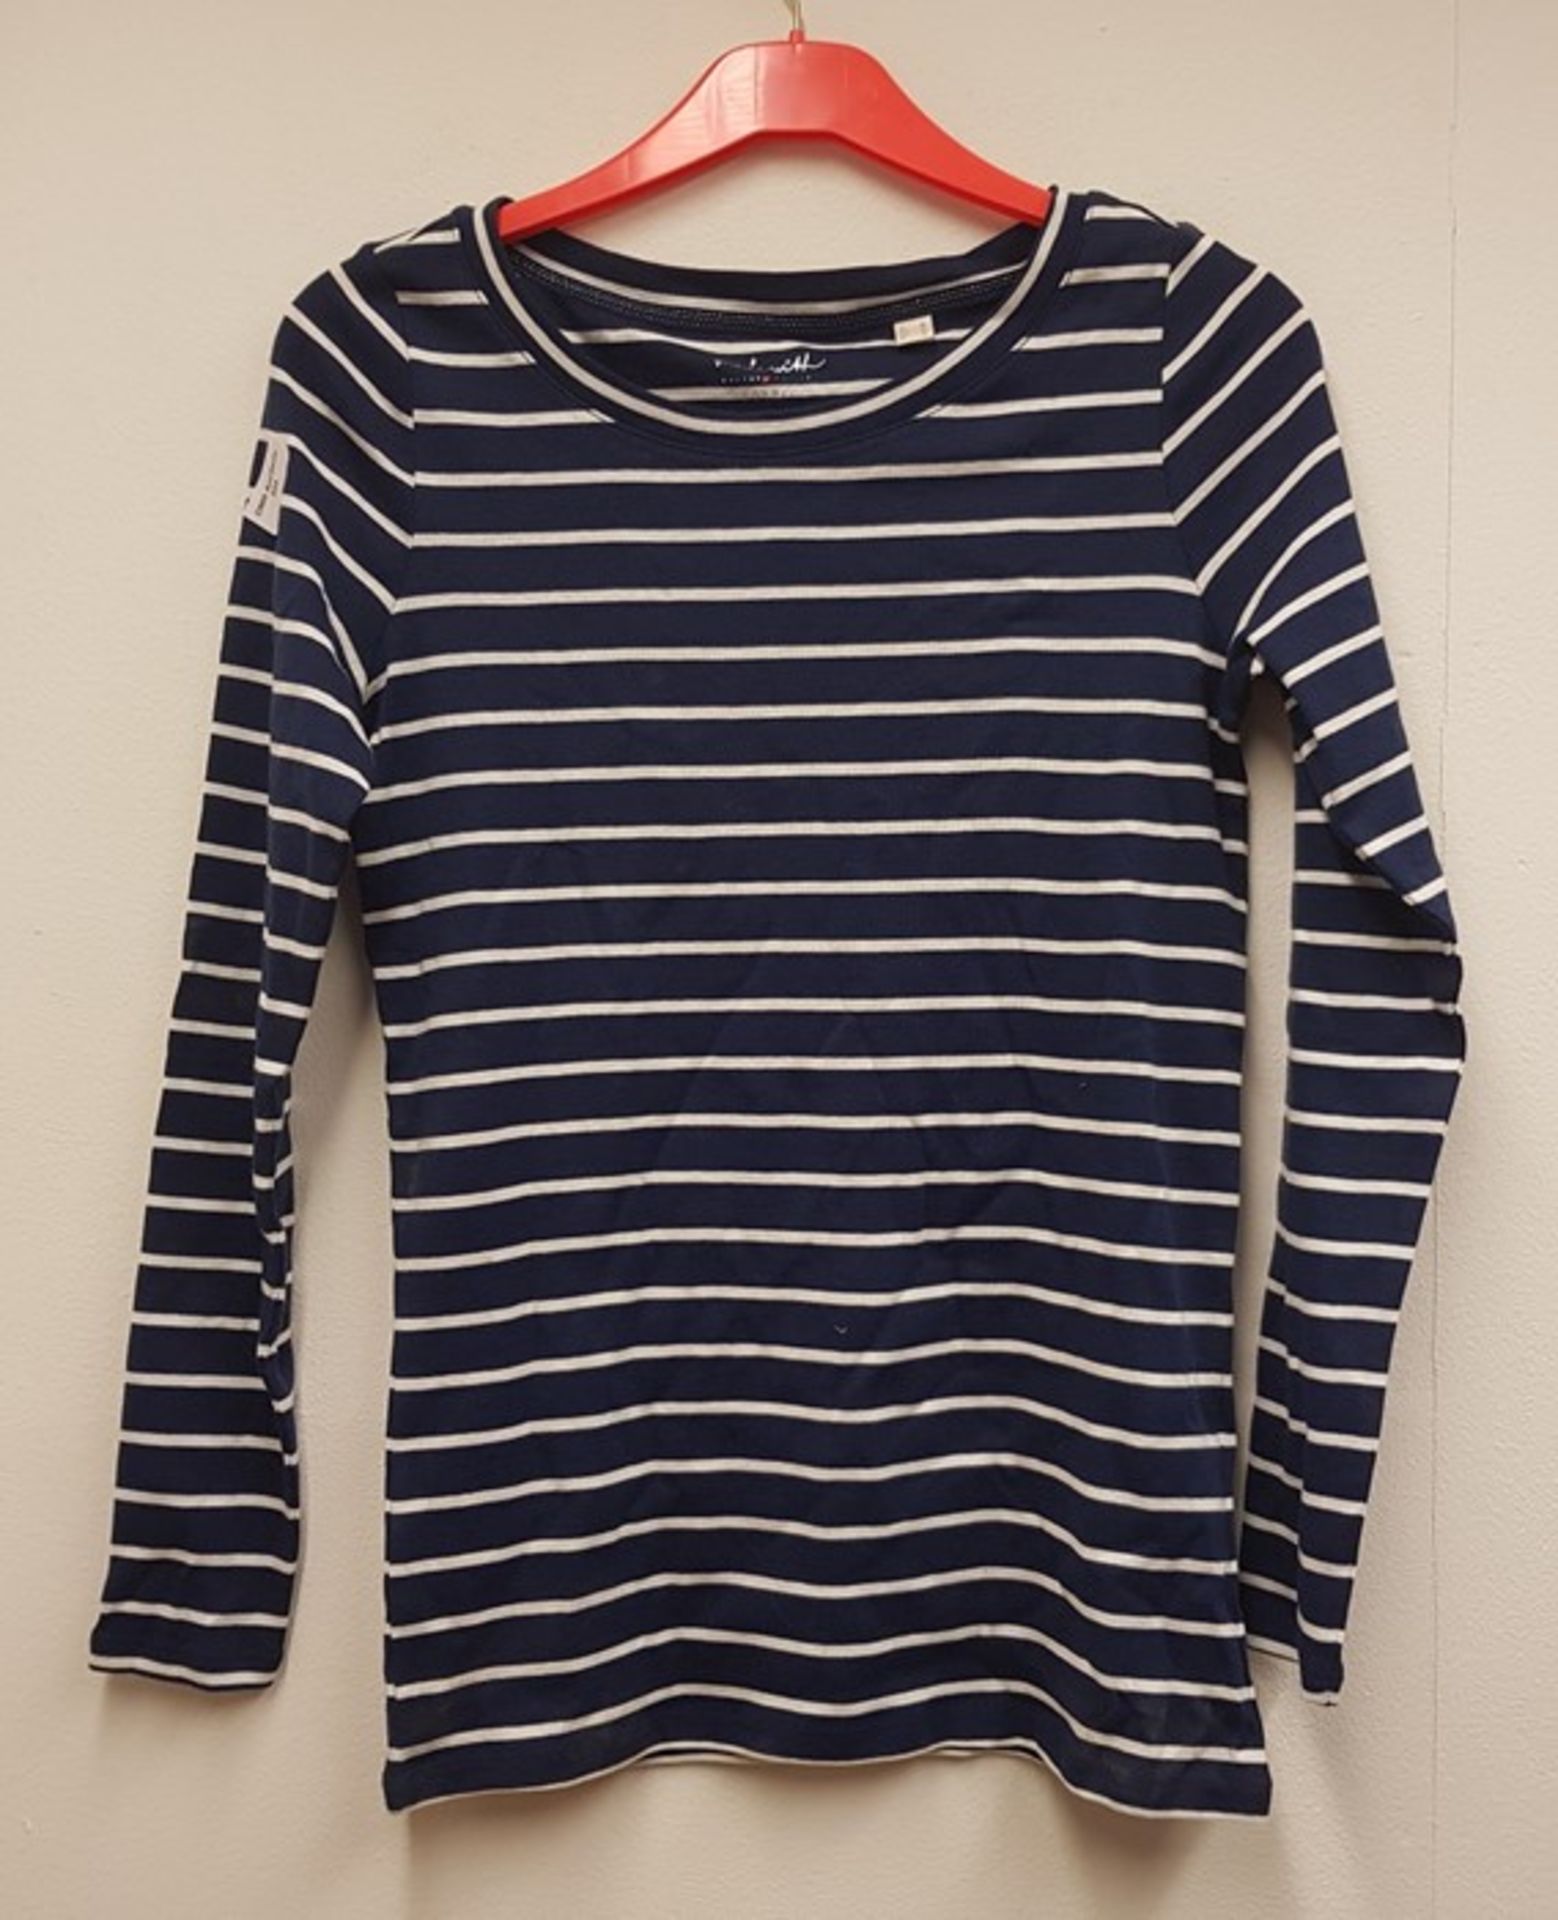 1 AS NEW ESPPIT BLUE AND WHITE STRIPE TOP (VIEWING